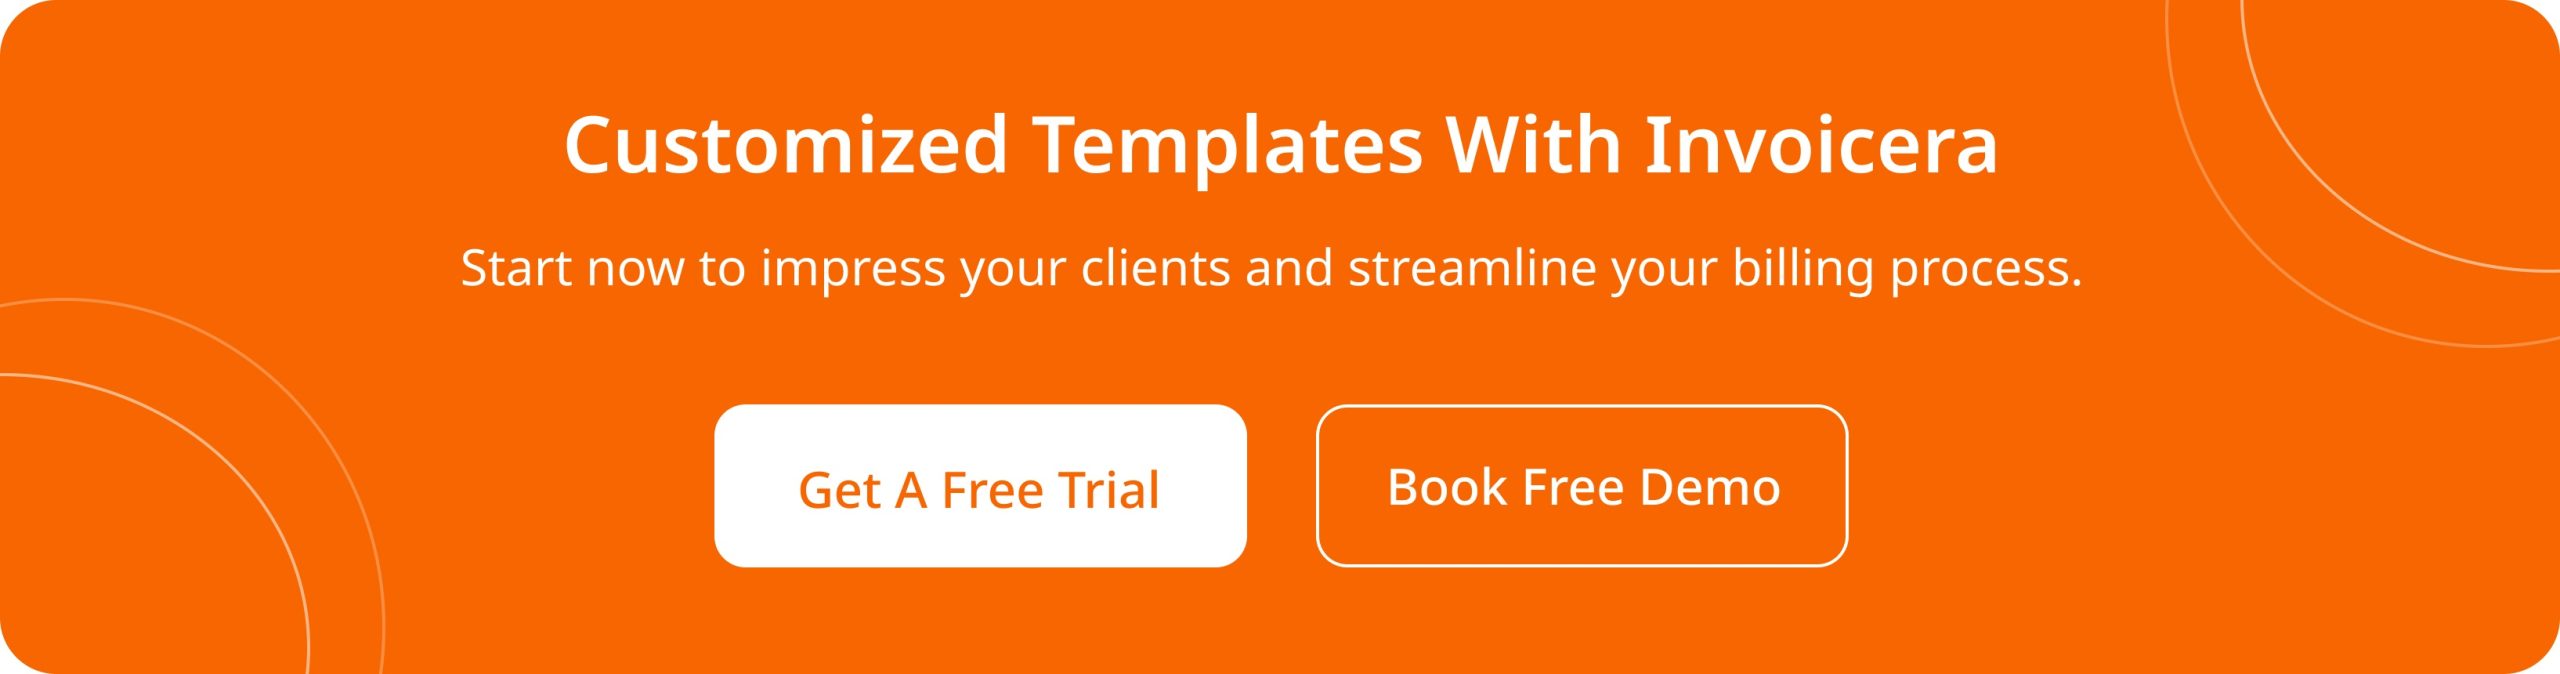 customized templates with invoicera